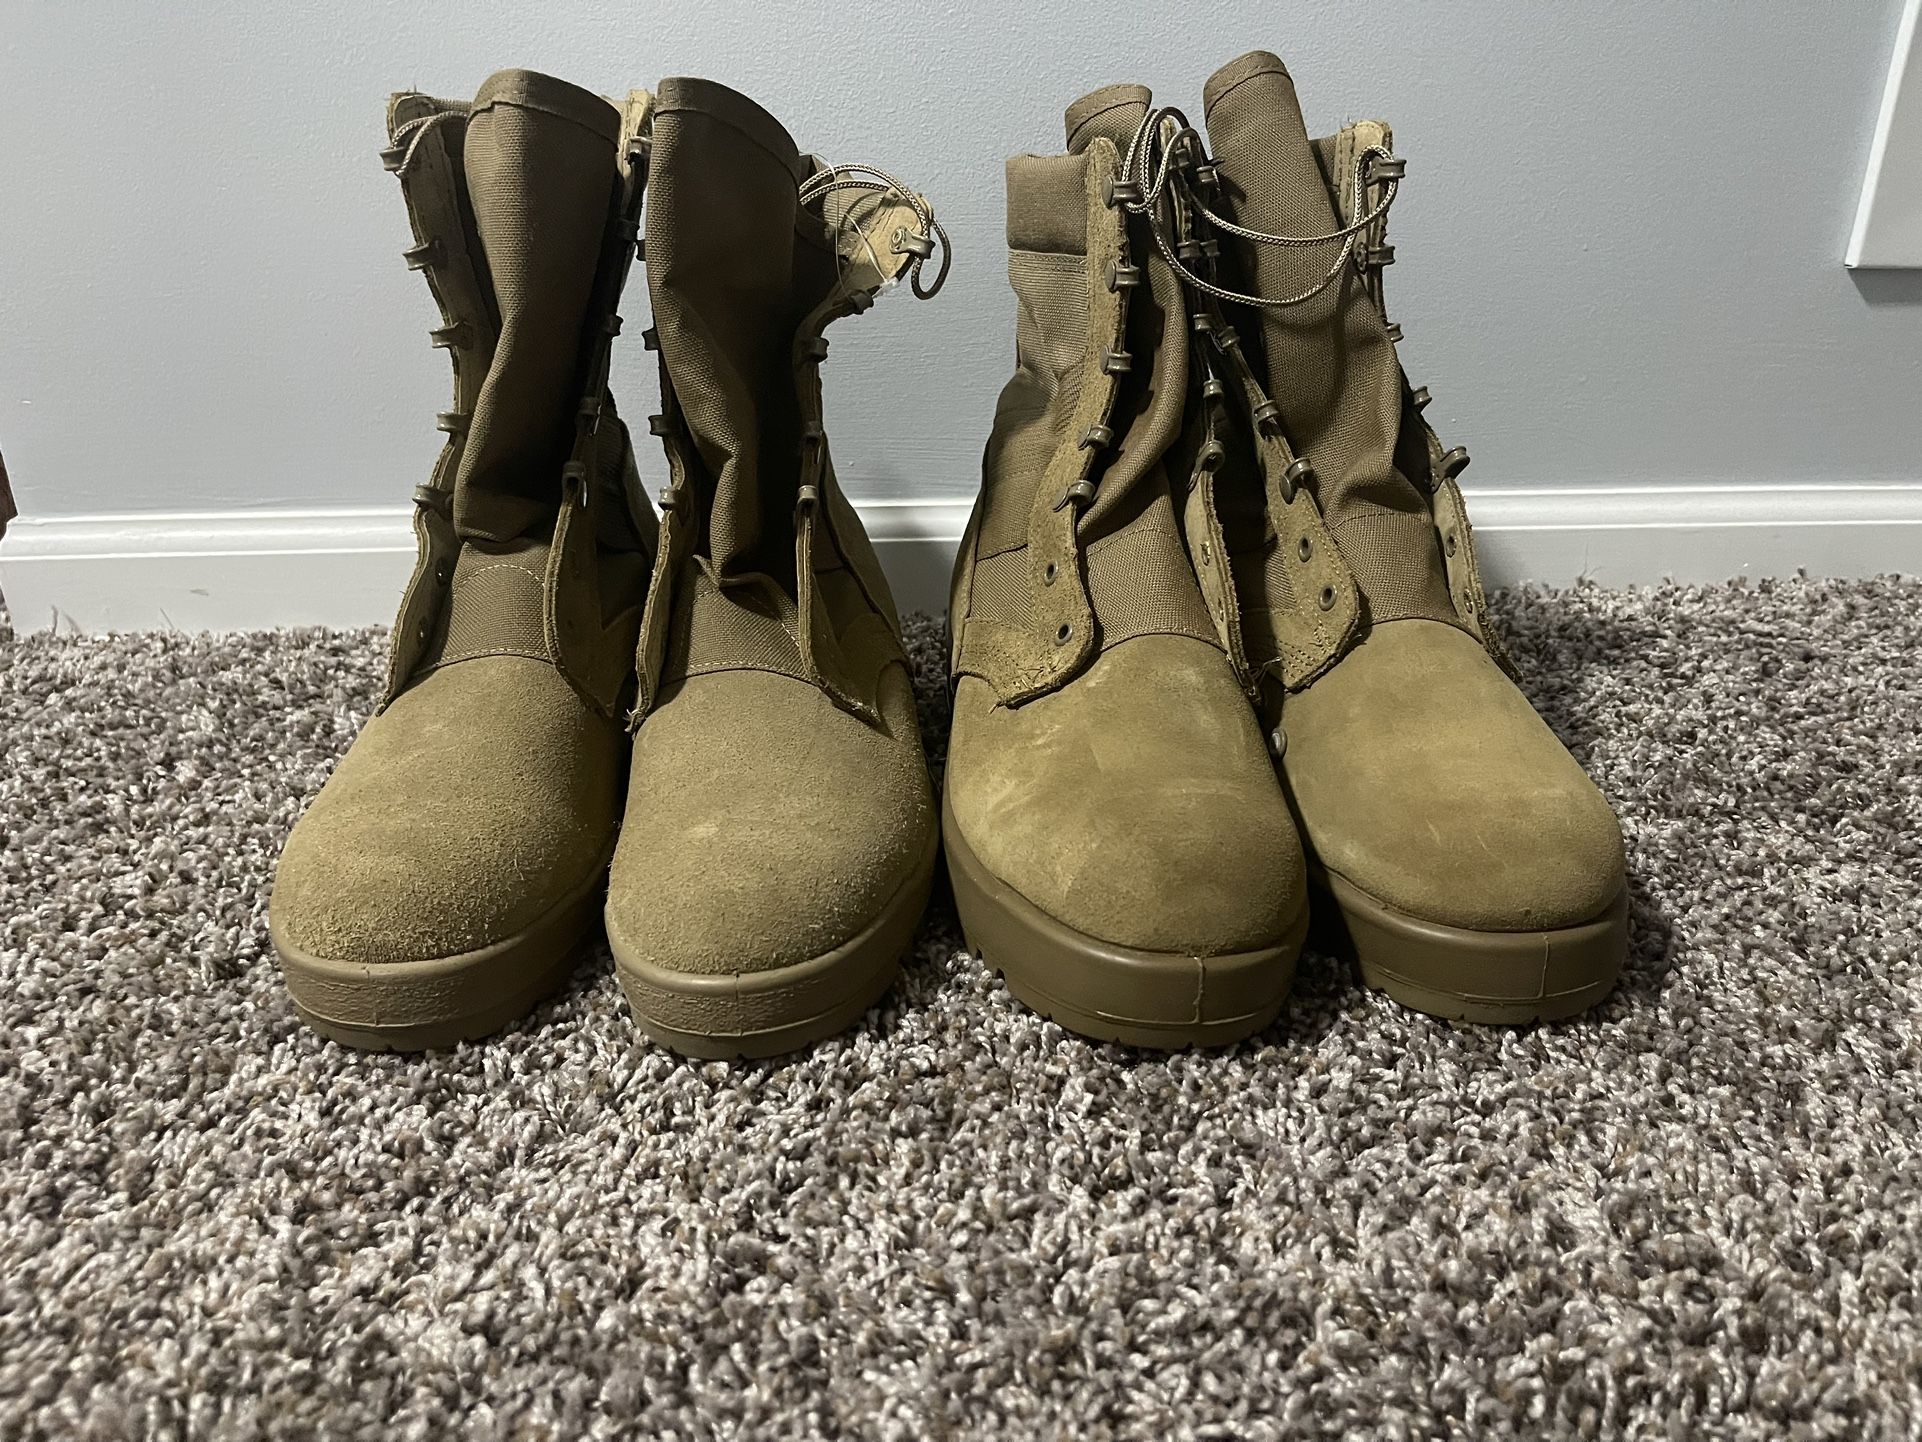 Military Boots (New)